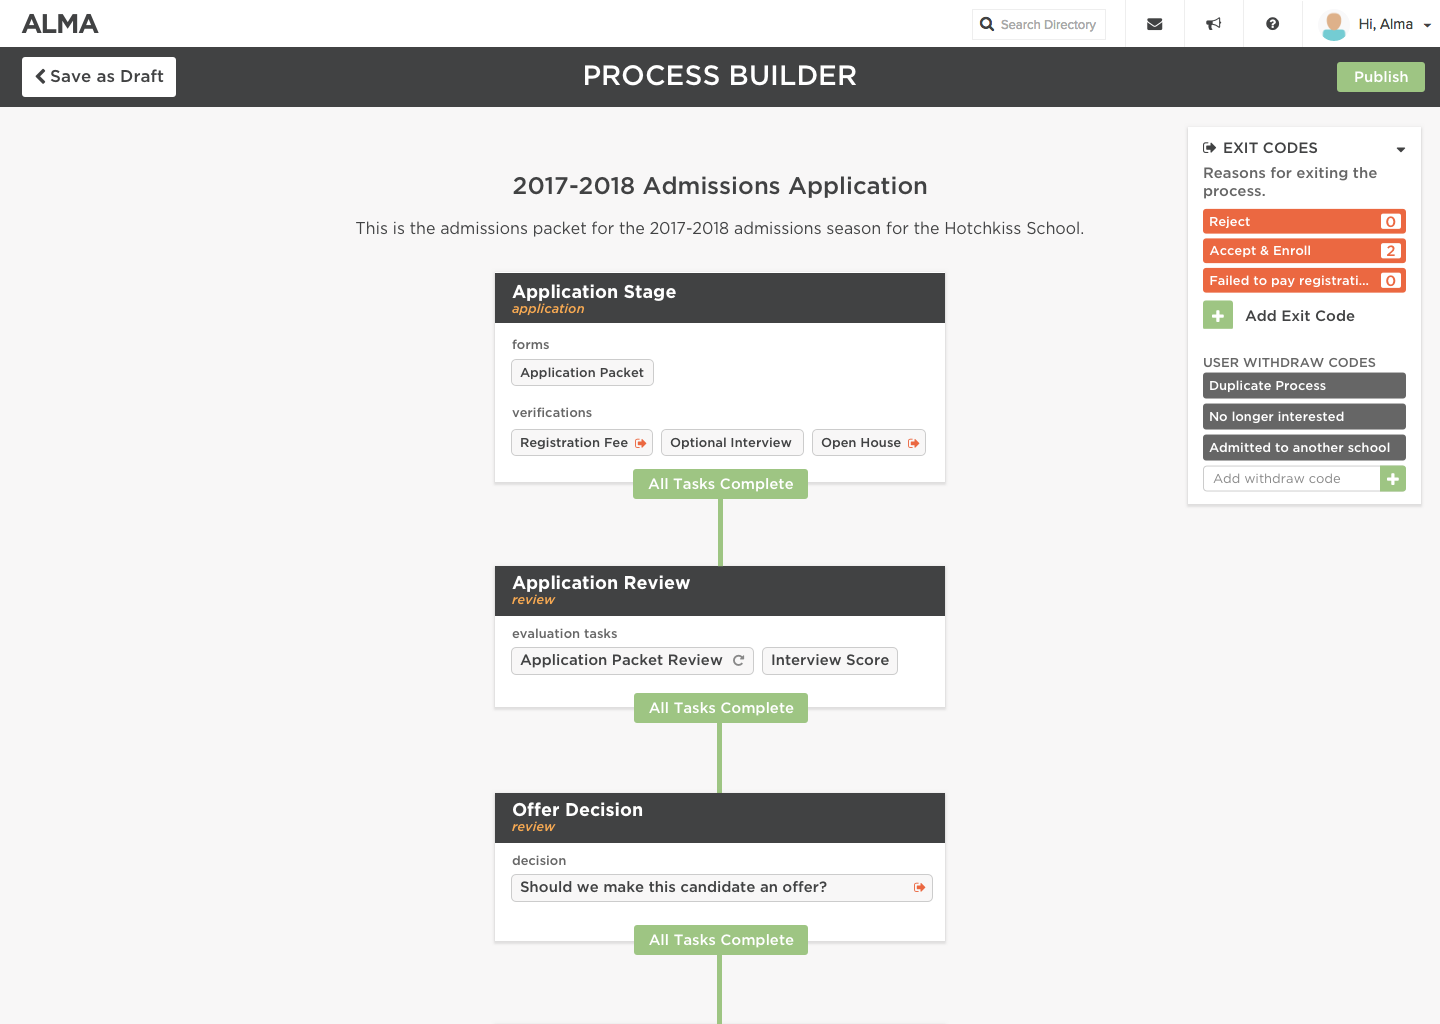 School SIS Admissions application process builder